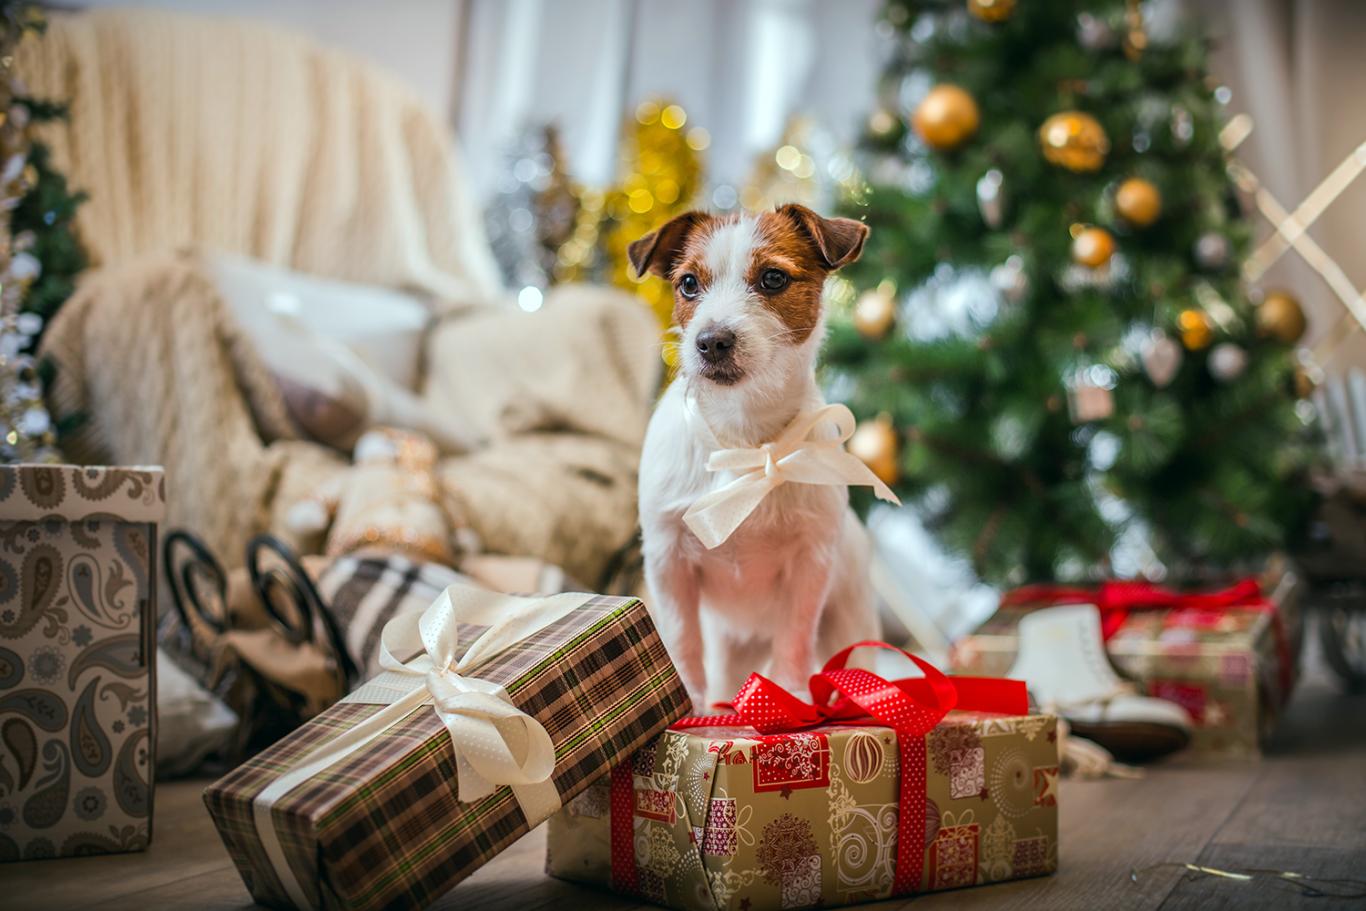 HOLIDAYS - Help Your Dog Deal With Visitors